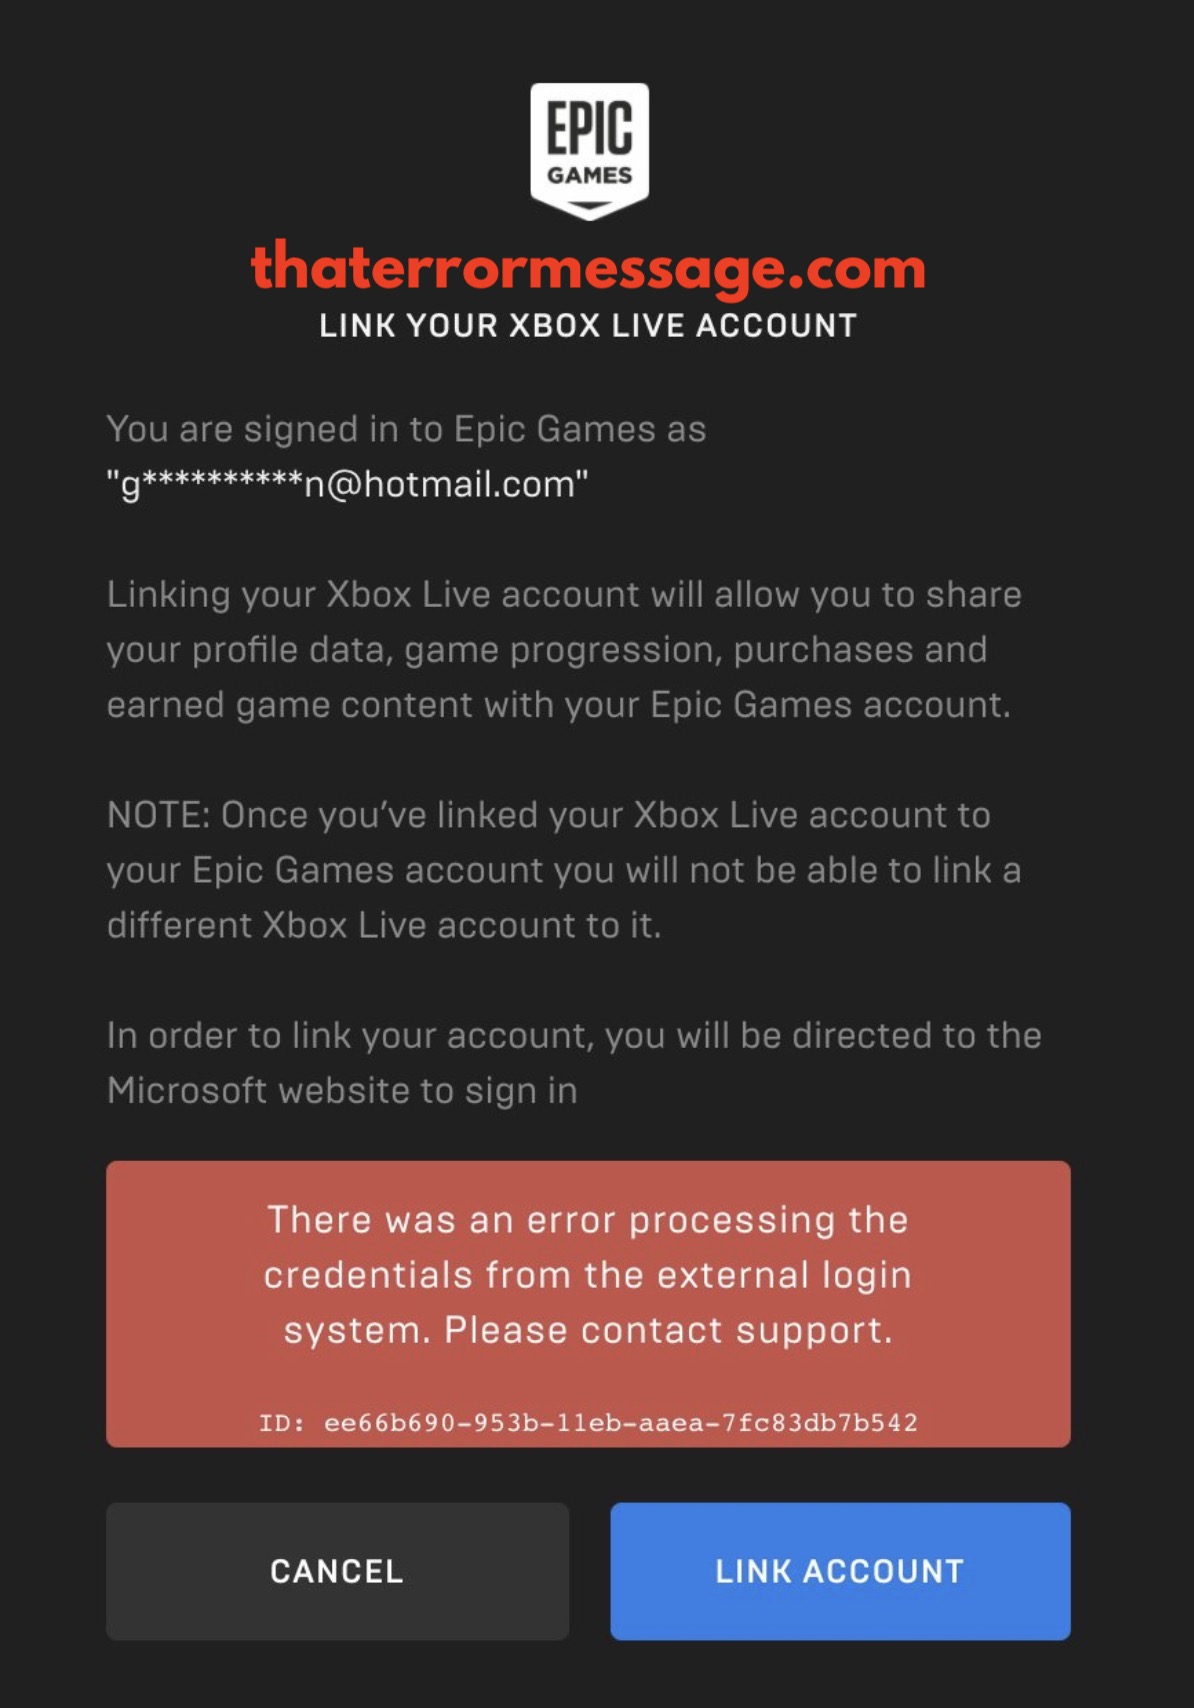 Link Your Xbox Live Account Epic Games Error Processing Credentials